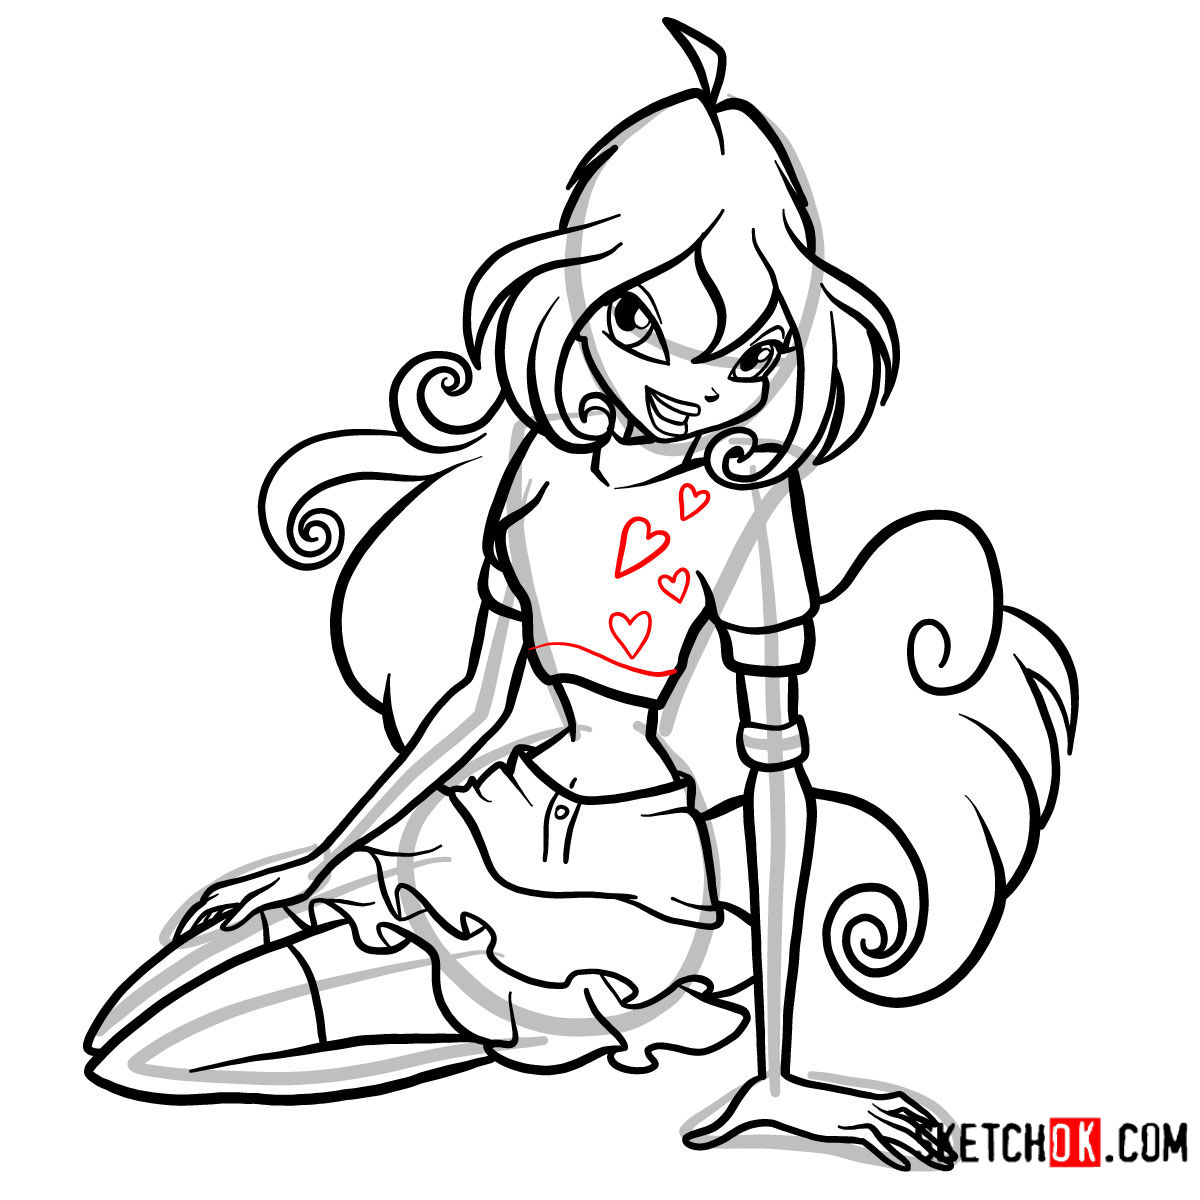 How to draw Bloom fire fairy sitting and smiling - step 13